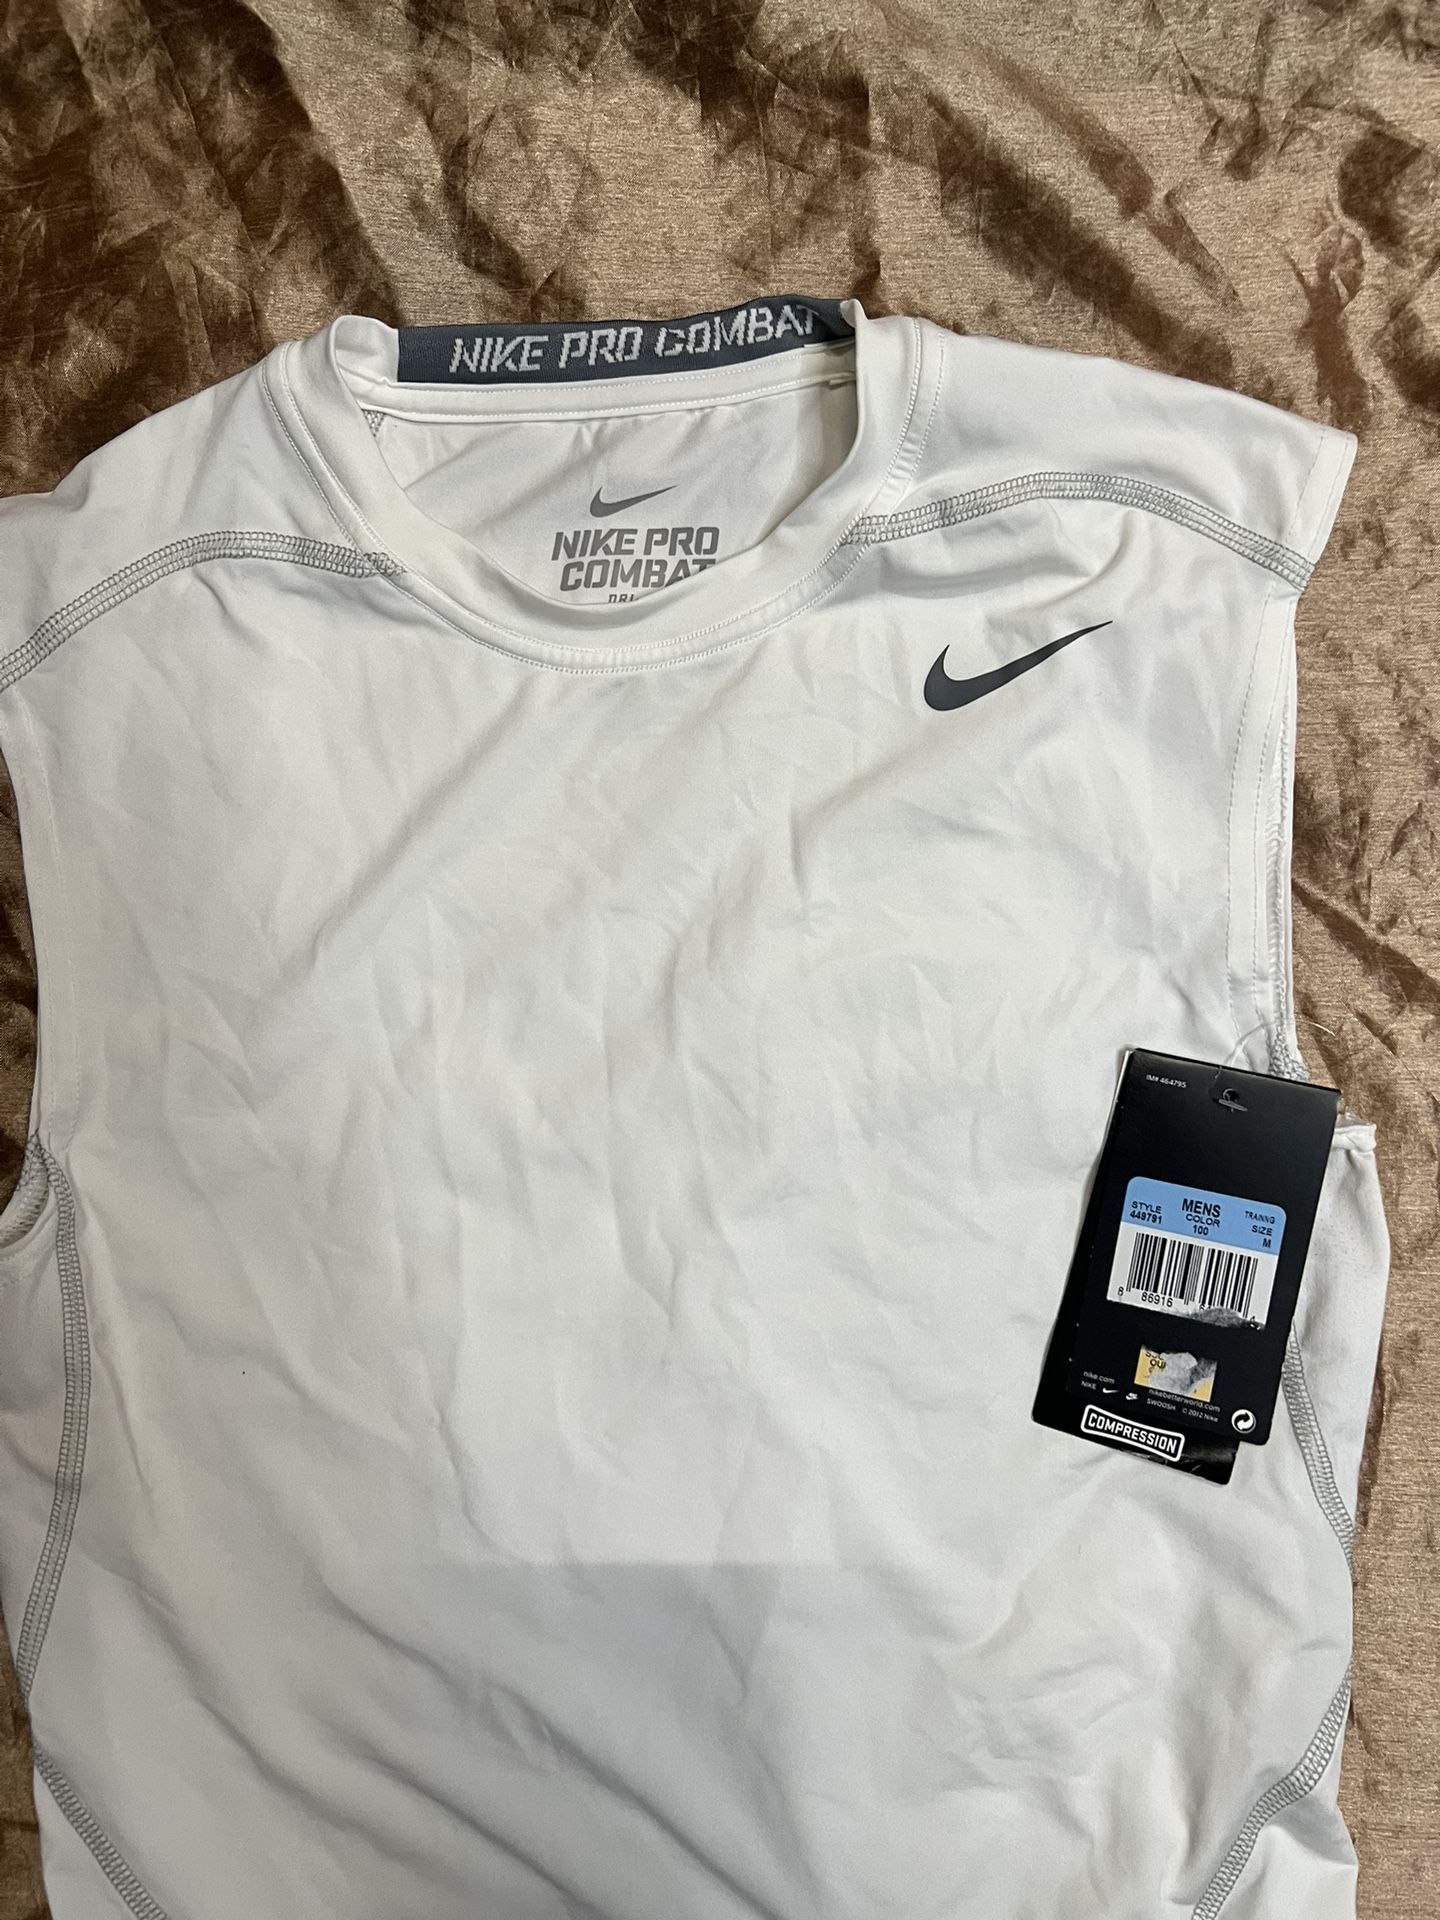 Men's Medium NEW Nike Combat Dri-Fit Compression white sleeveless fitted for in Artesia, CA OfferUp